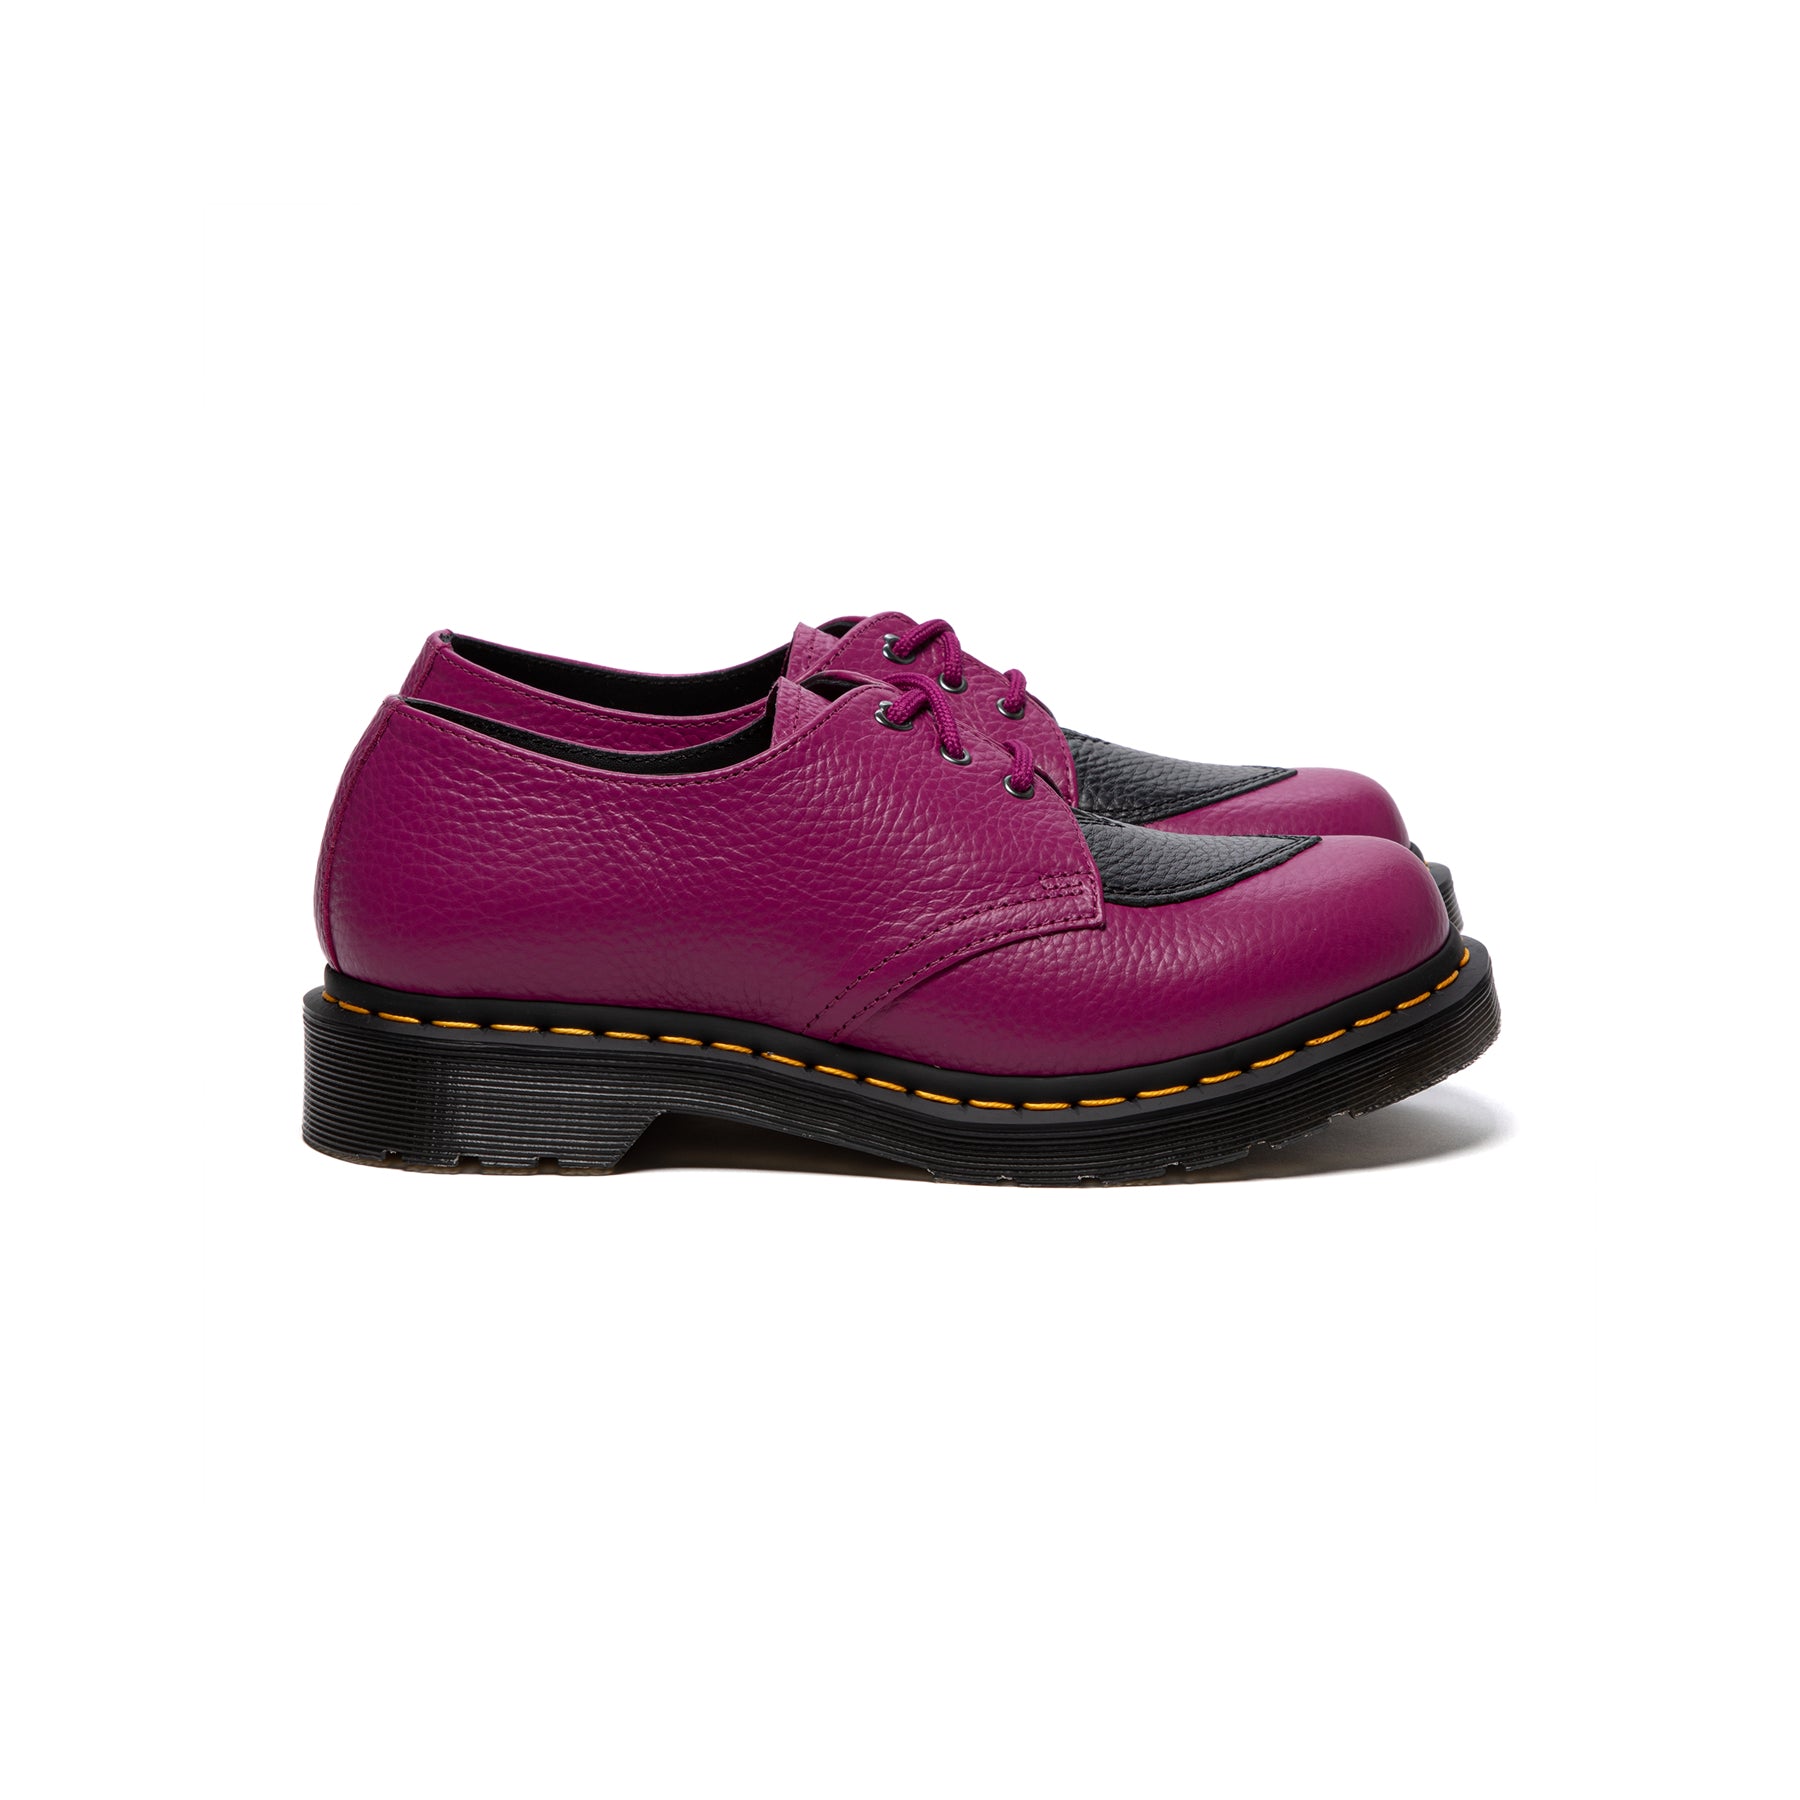 Dr. Martens 1461 Amore Leather Oxford Shoes (Fuchsia/Black Milled